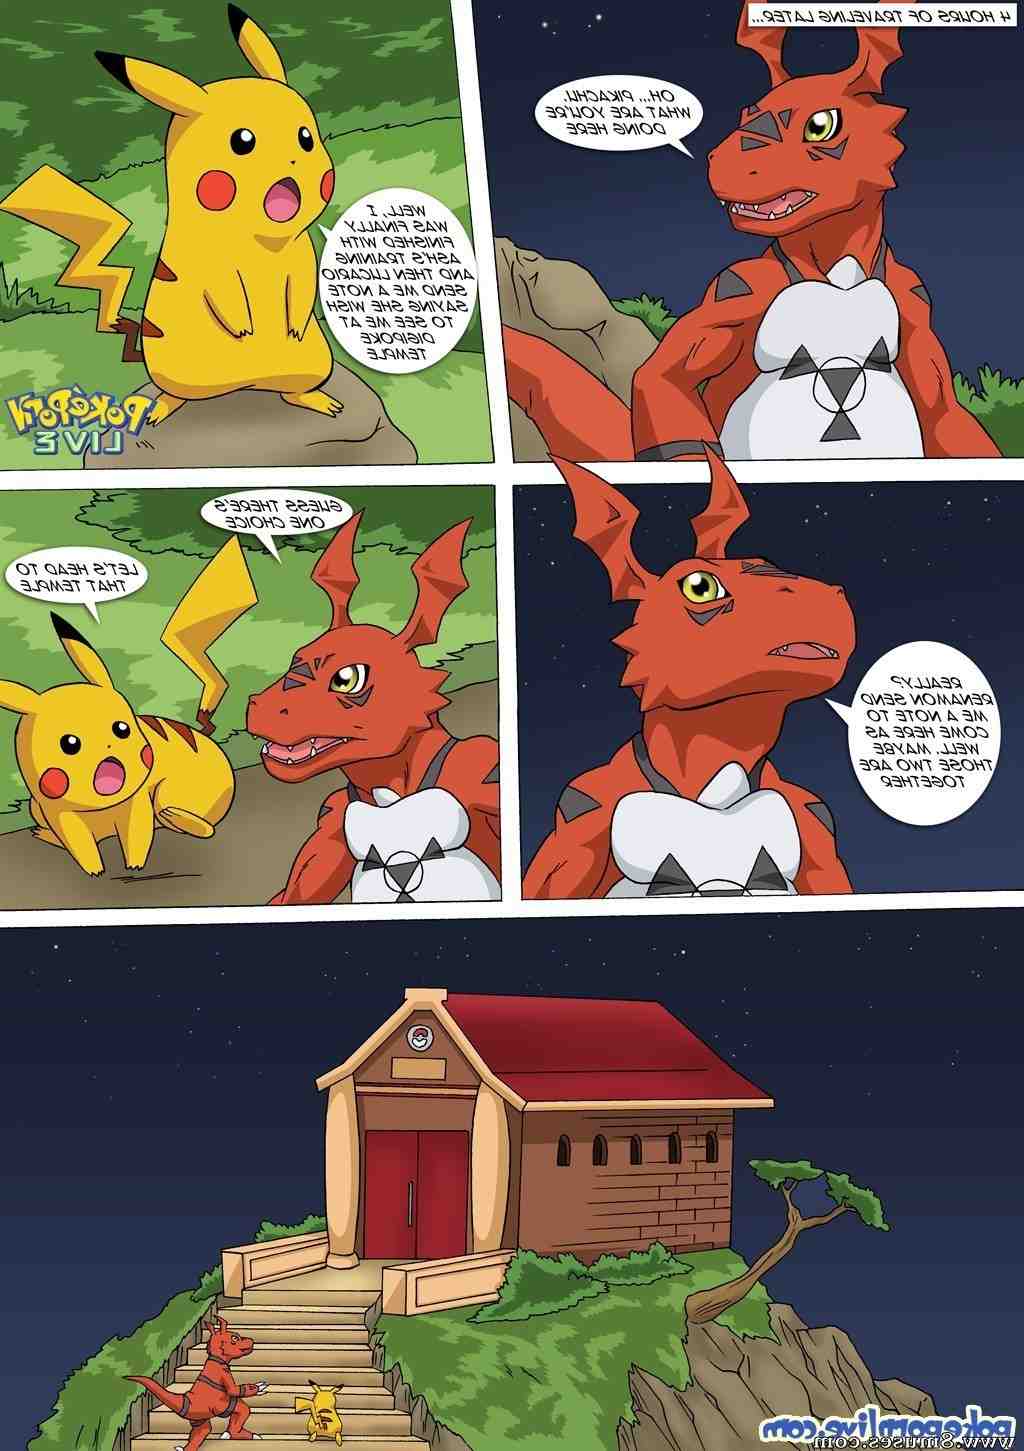 PokepornLive-Comics/Girls-come-to-play Girls_come_to_play__8muses_-_Sex_and_Porn_Comics_3.jpg